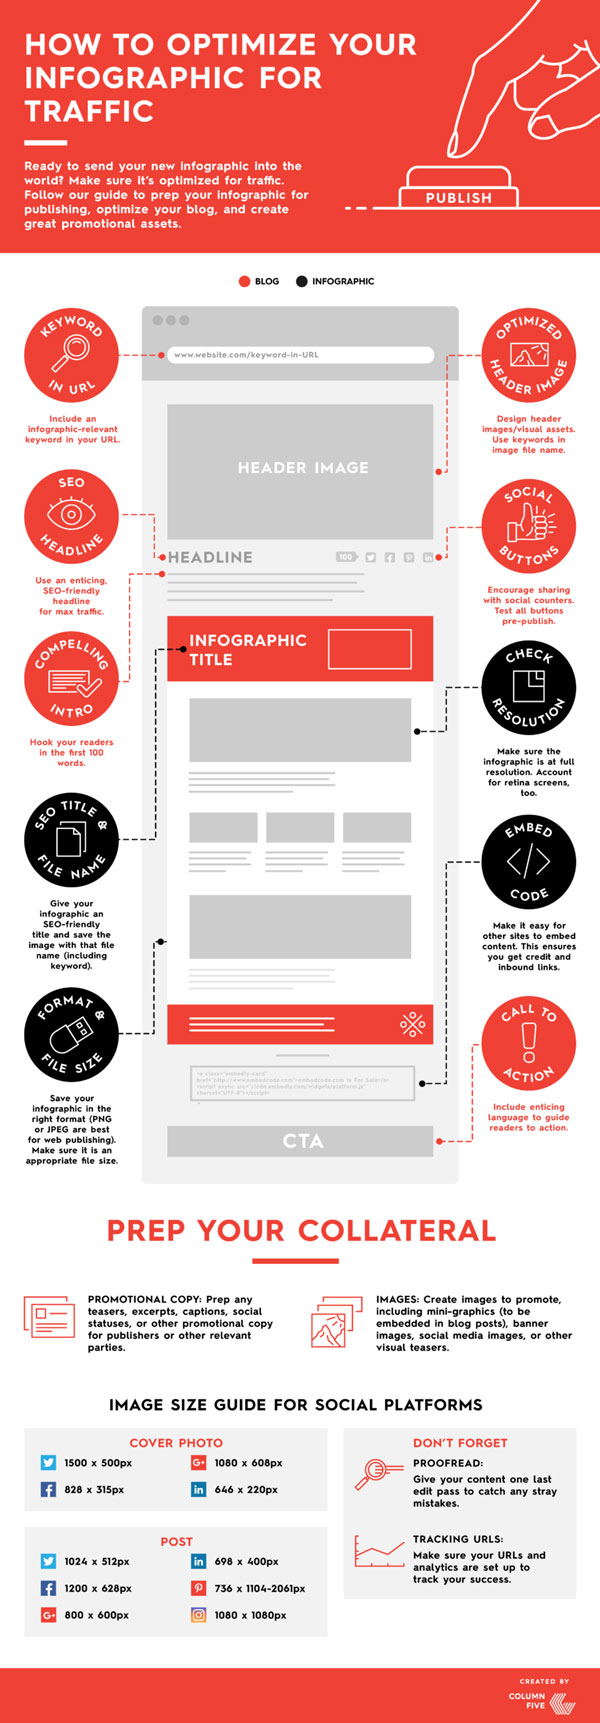 optimize-your-infographic